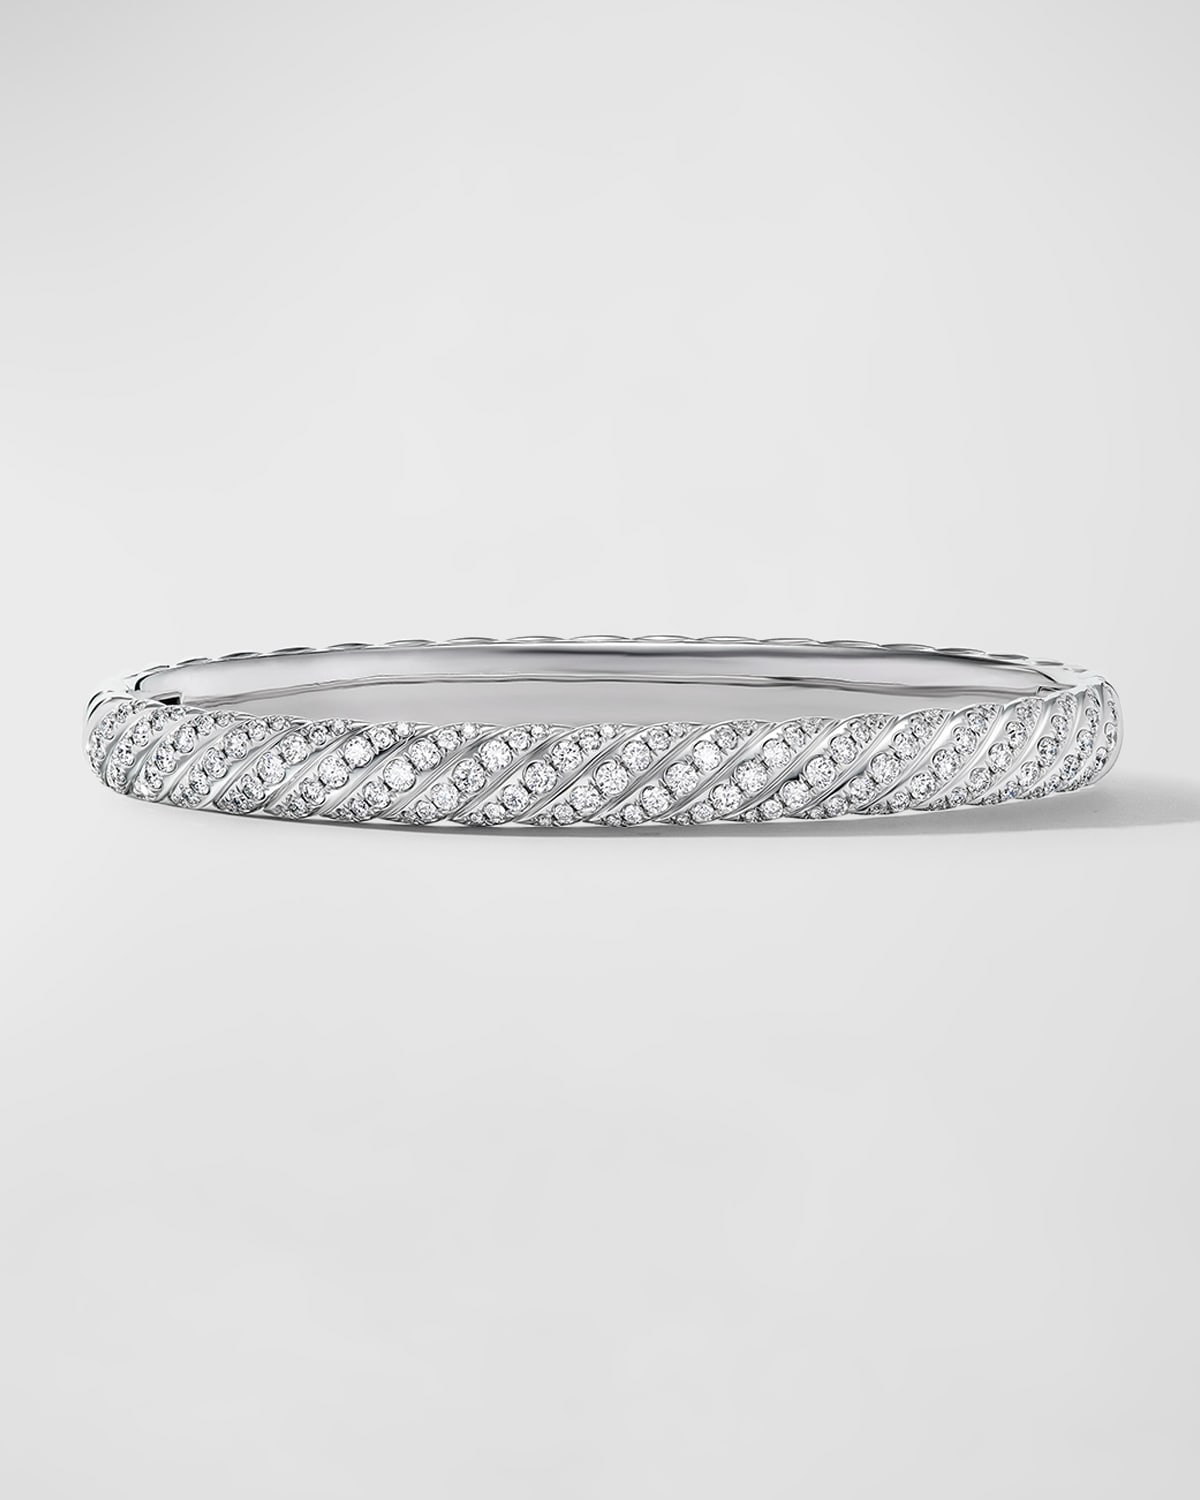 David Yurman Sculpted Cable Bracelet with Diamonds in 18K White Gold, 6mm, Size L